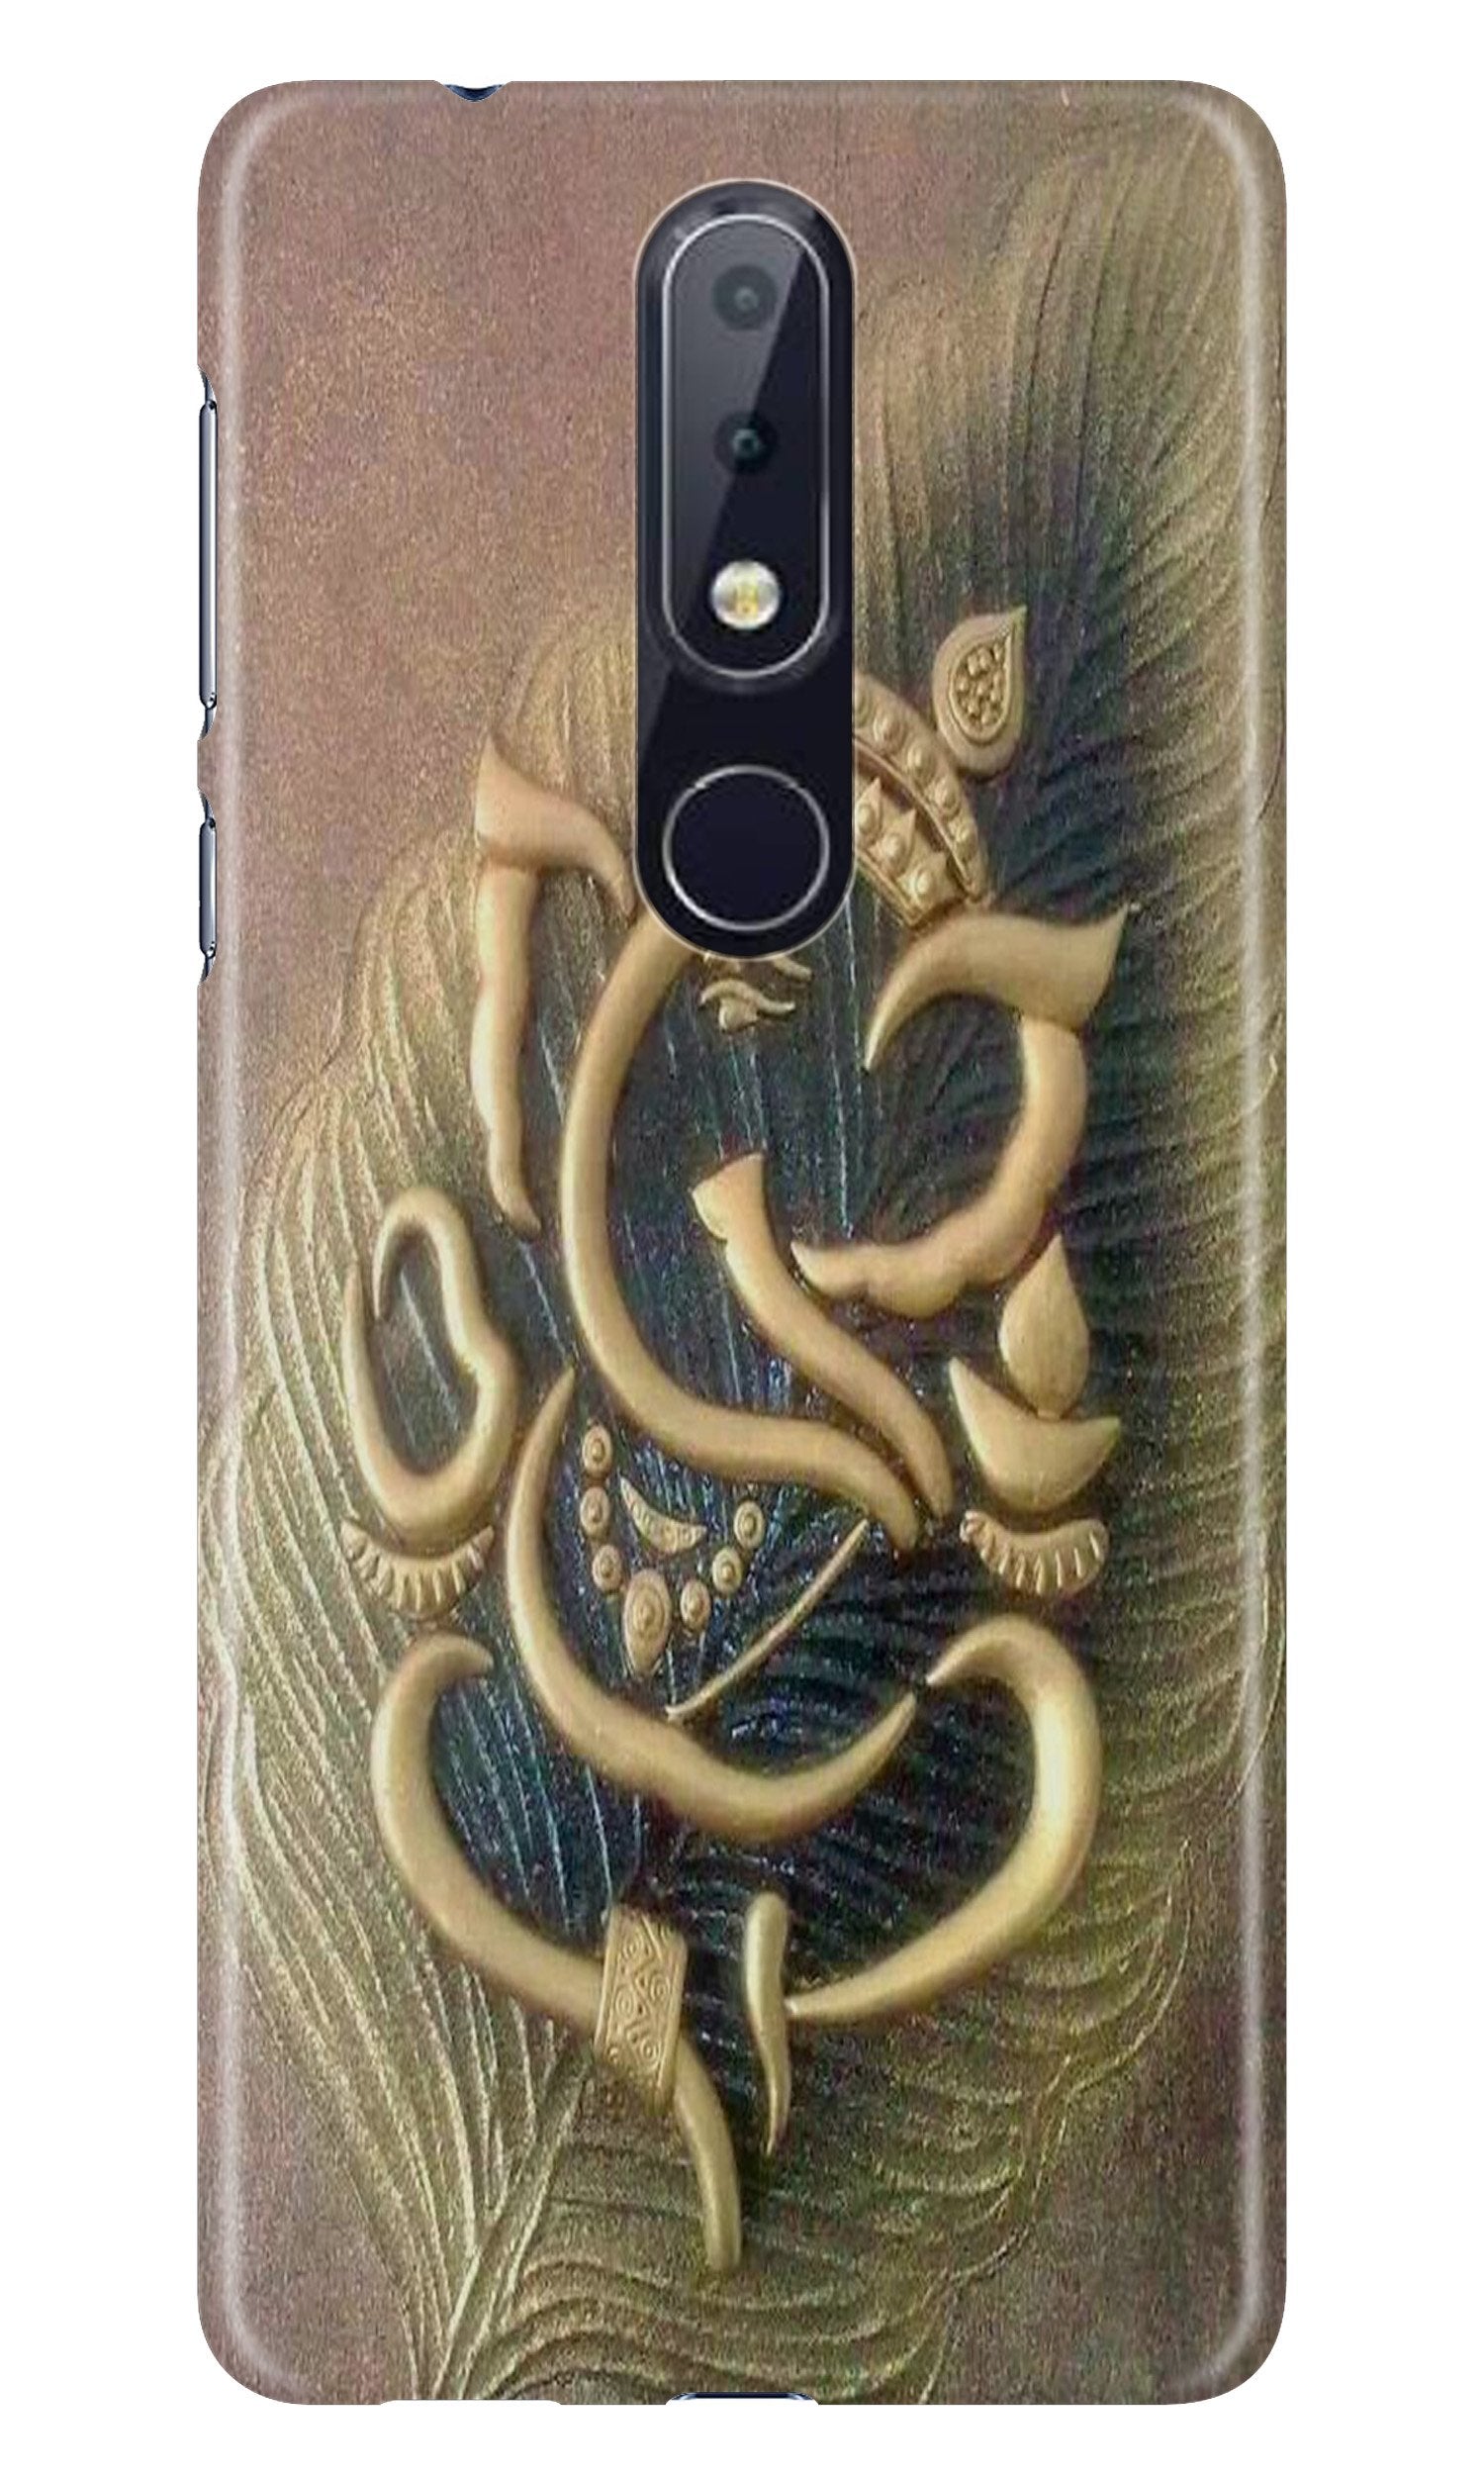 Lord Ganesha Case for Nokia 7.1